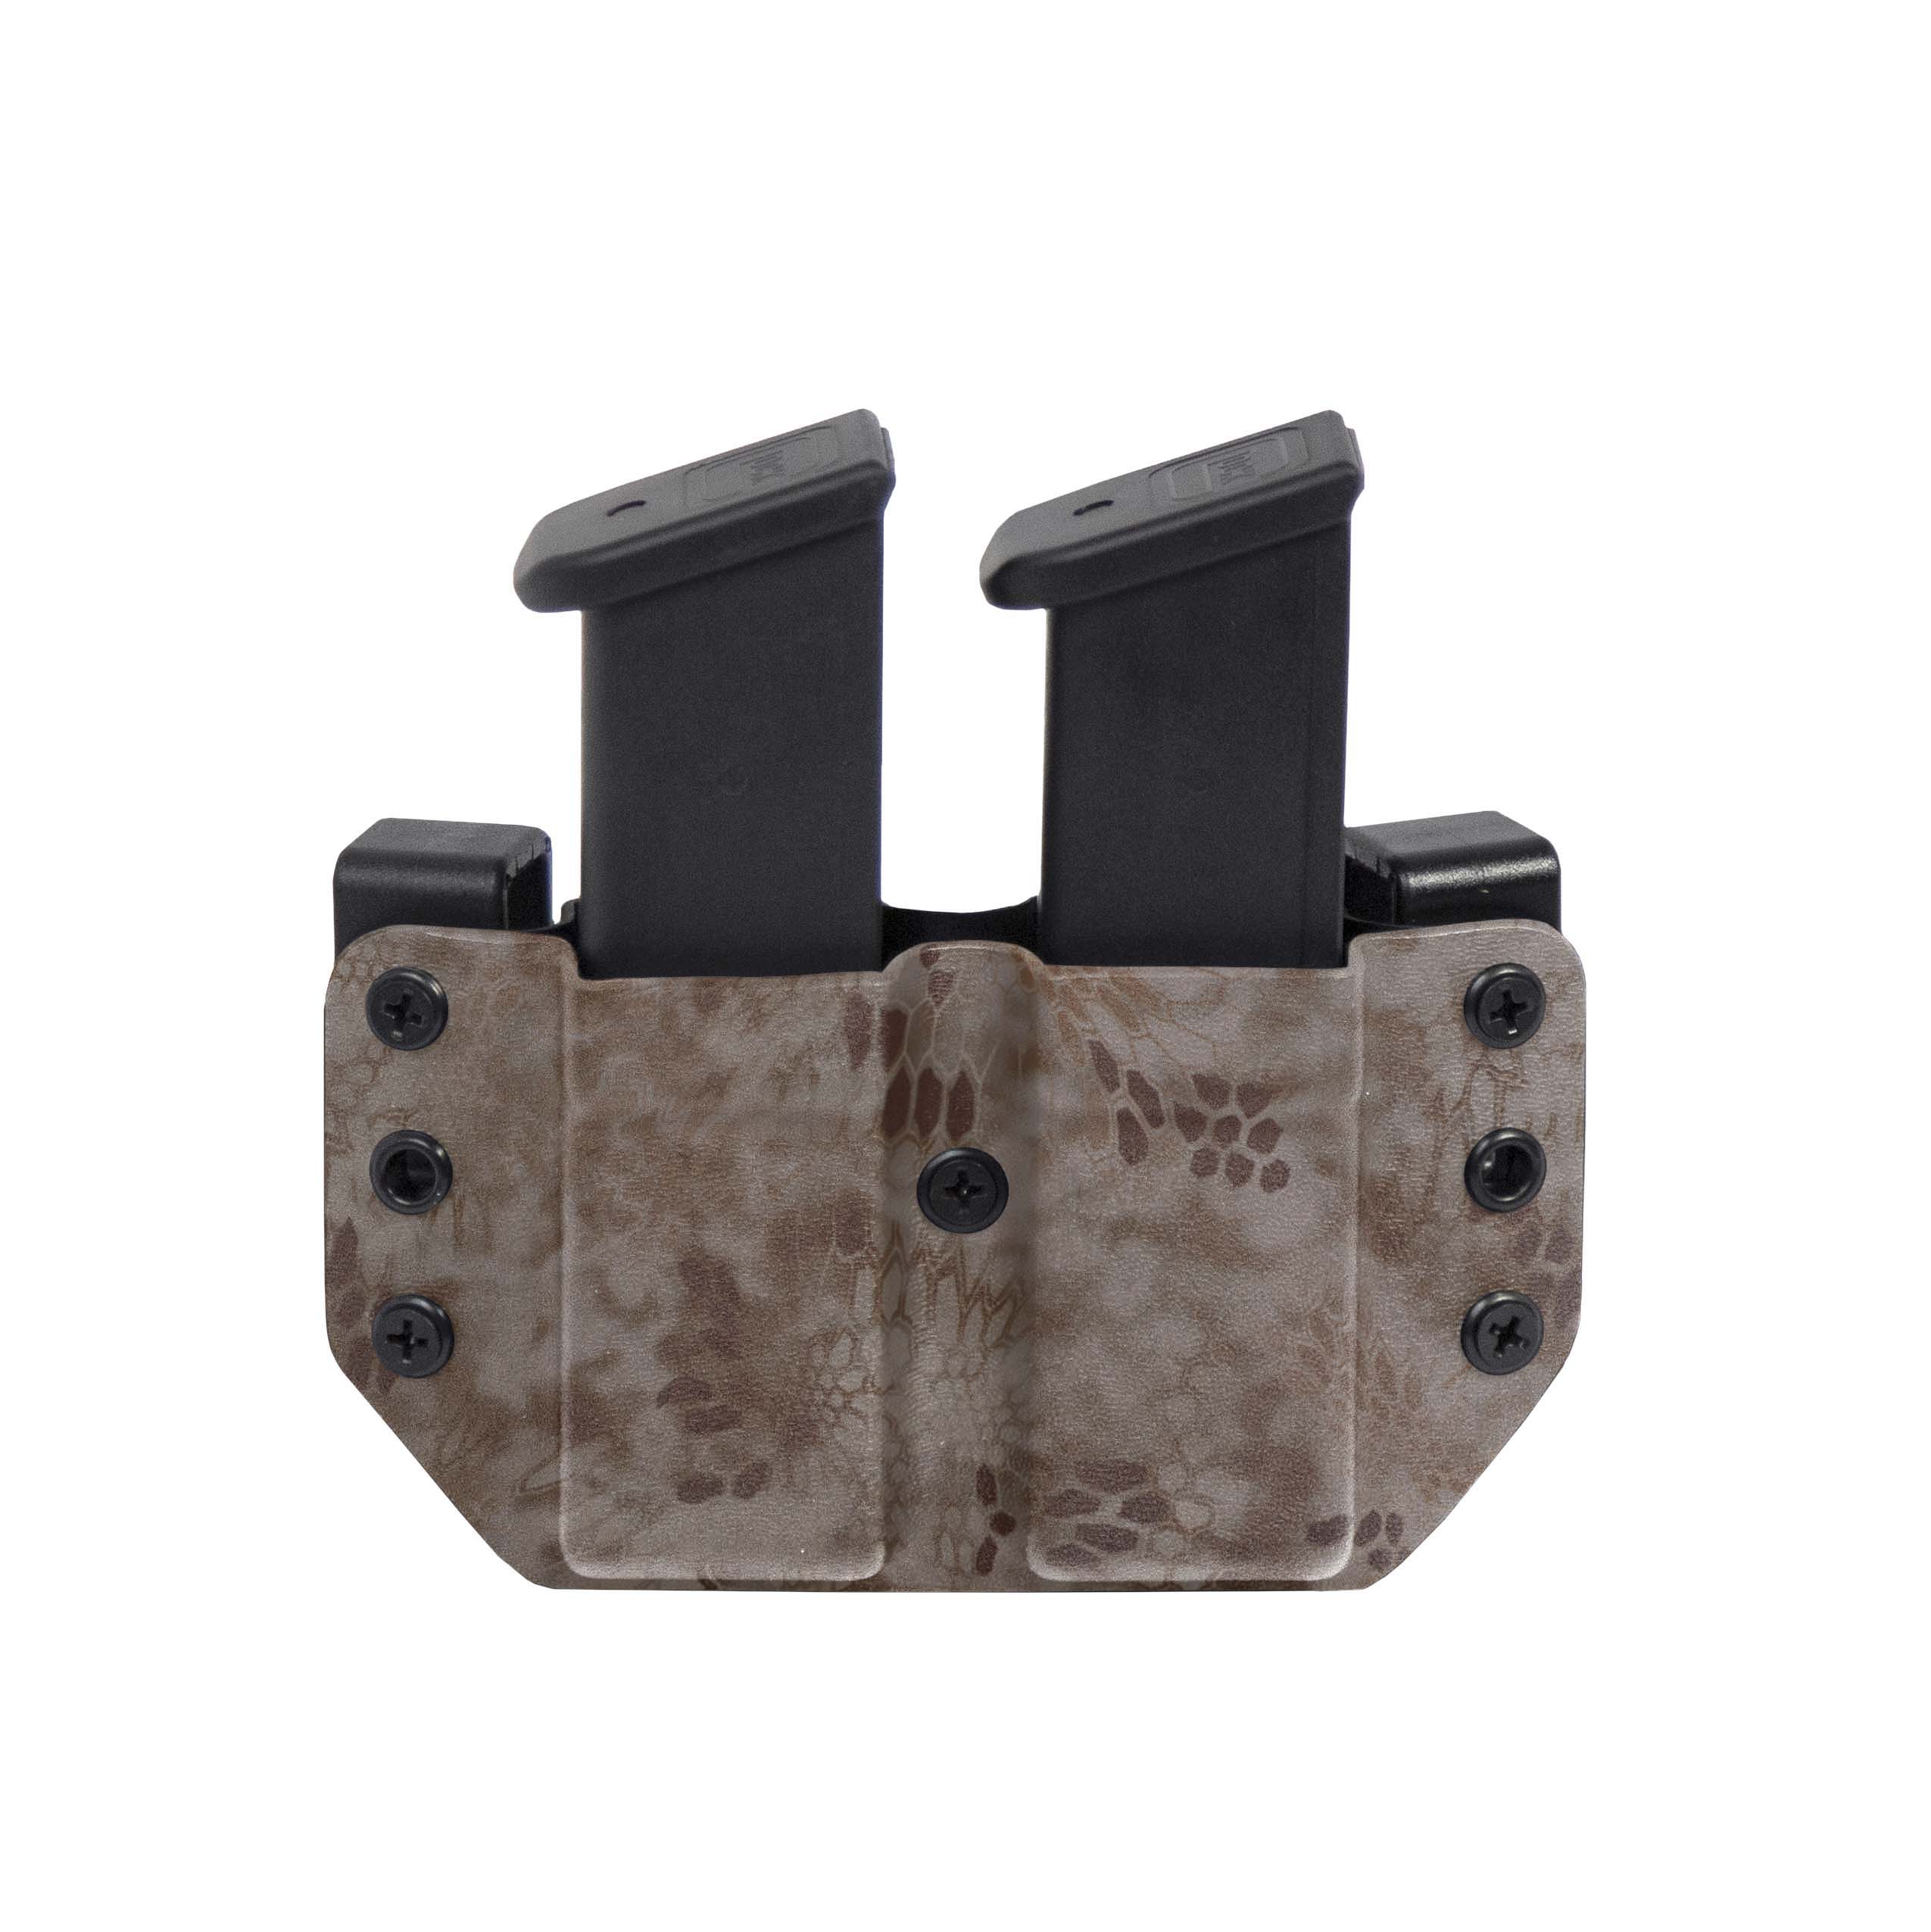 Kydex Double Mag Magazine Carrier for most Beretta Models by 1441 Gear 